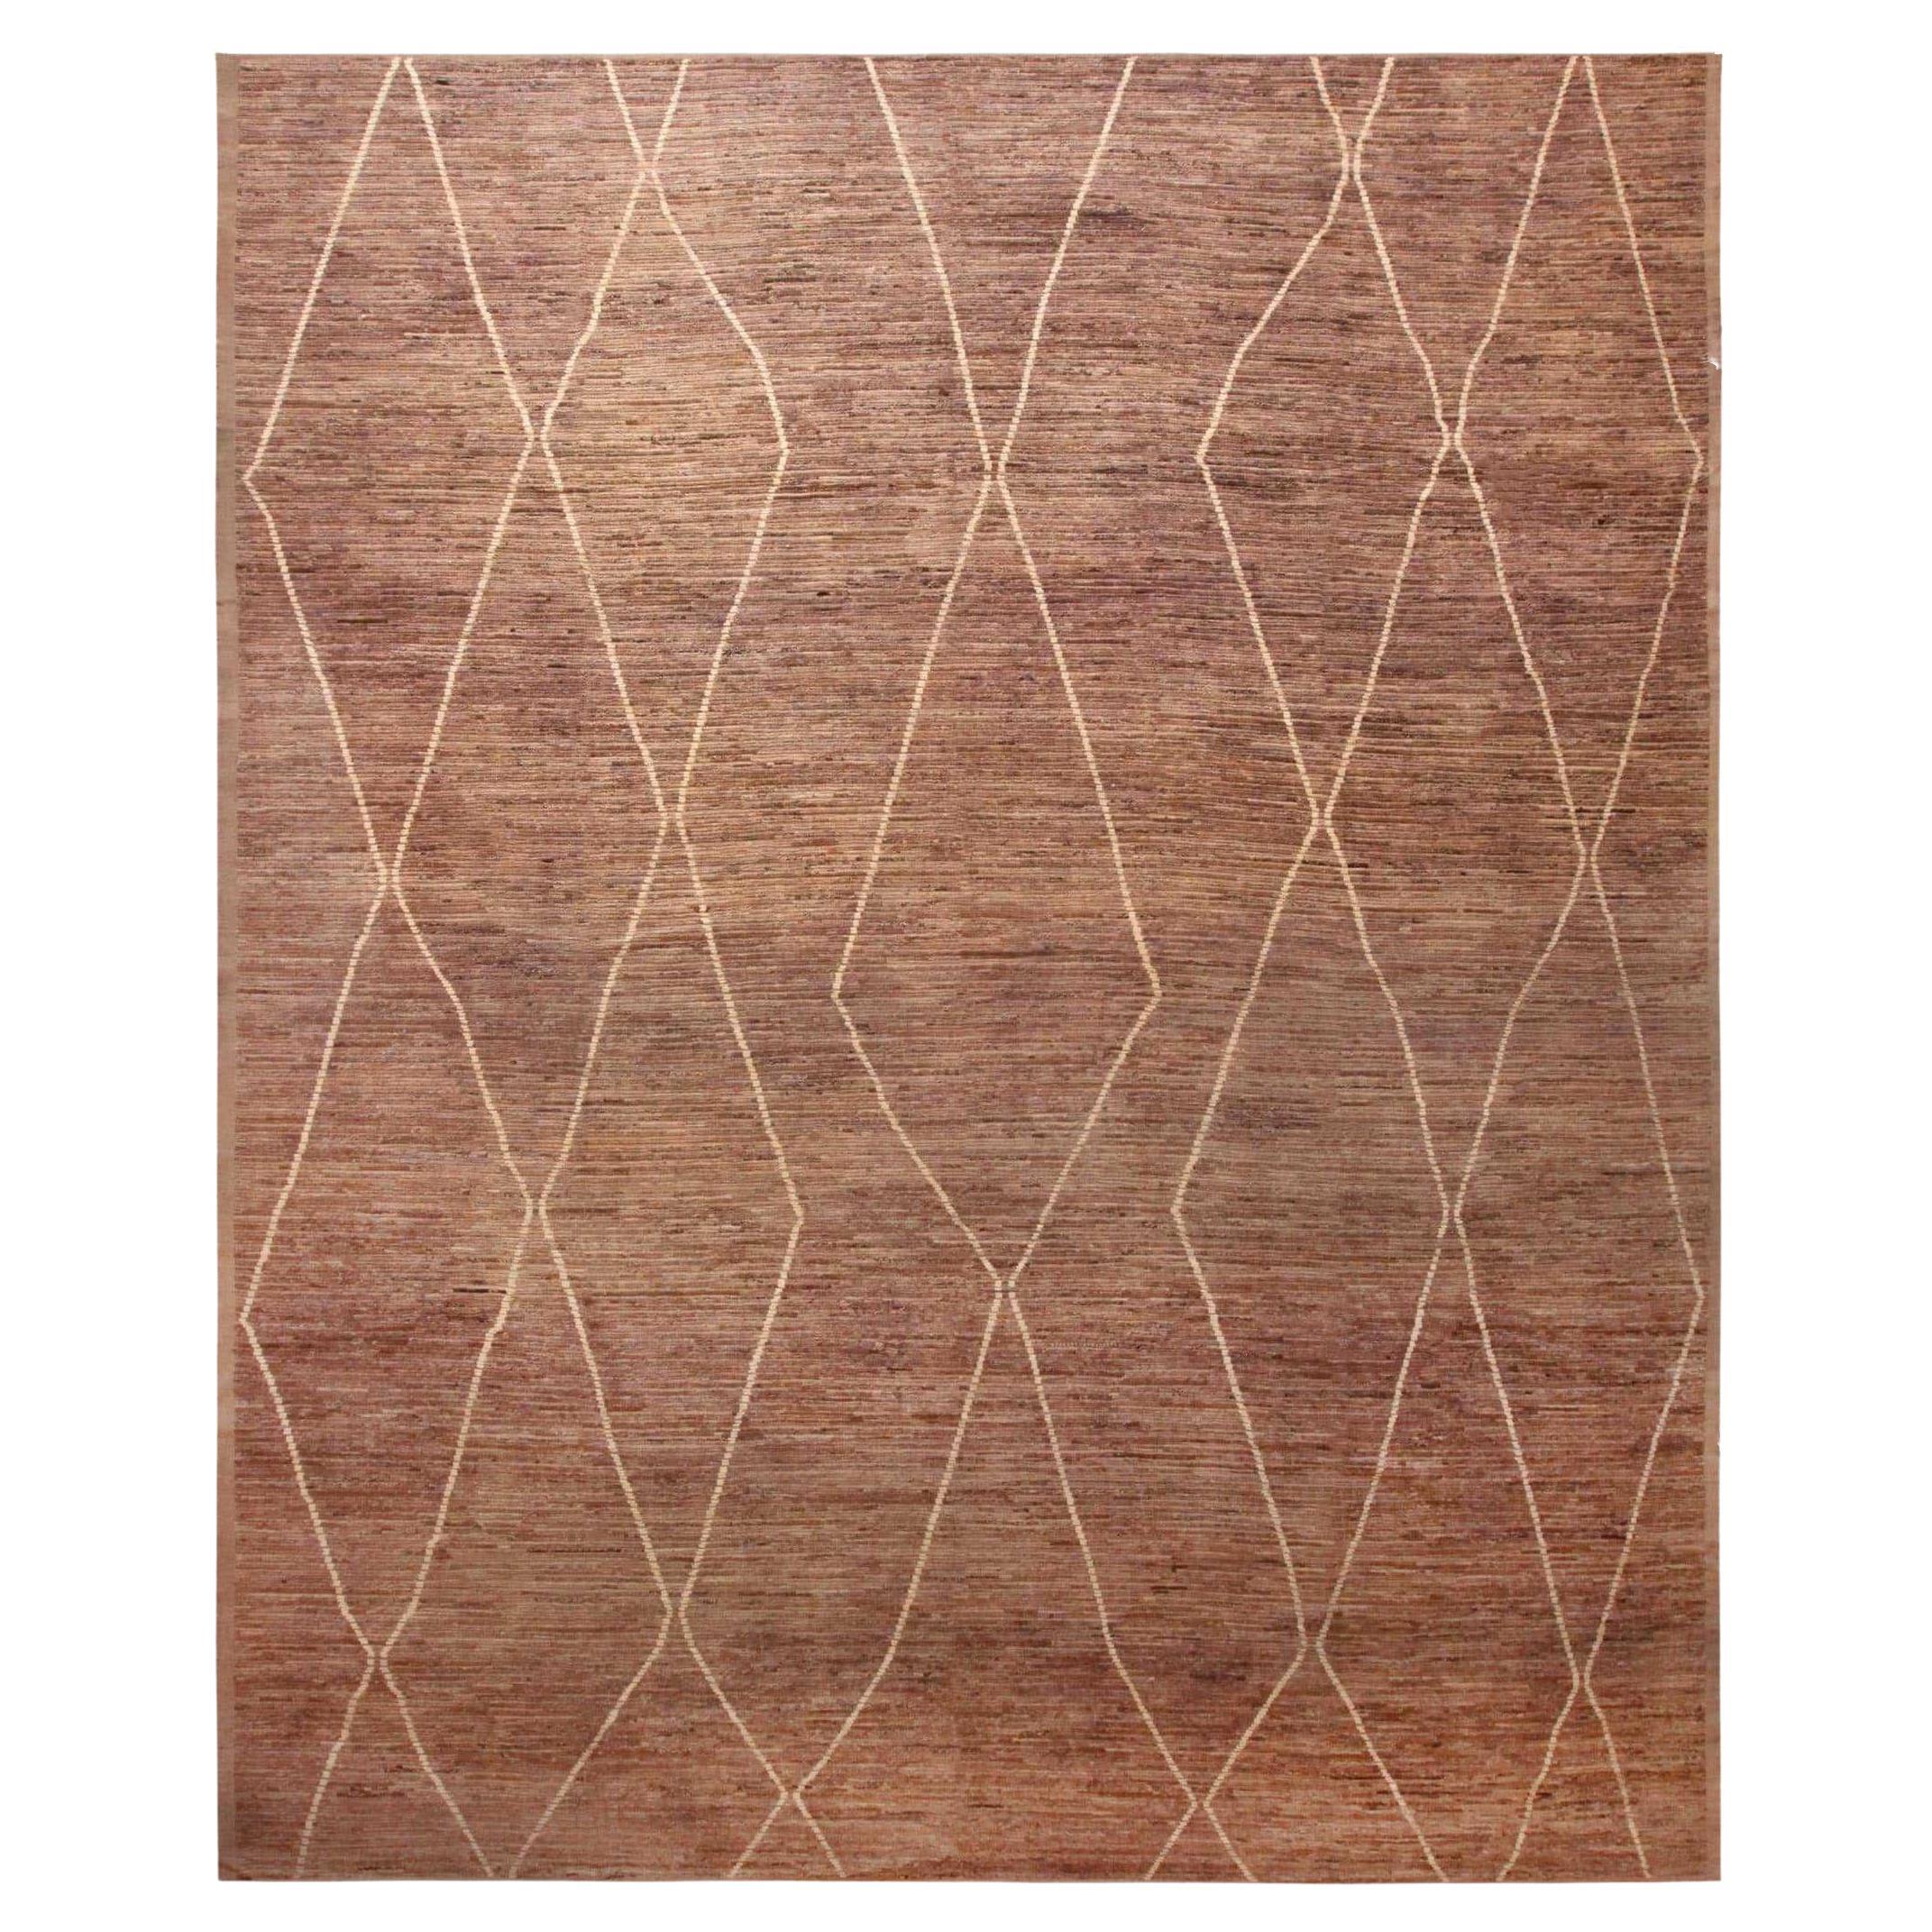 Nazmiyal Collection Tribal Style Marocain Contemporary Area Rug 13'2" x 15'8"